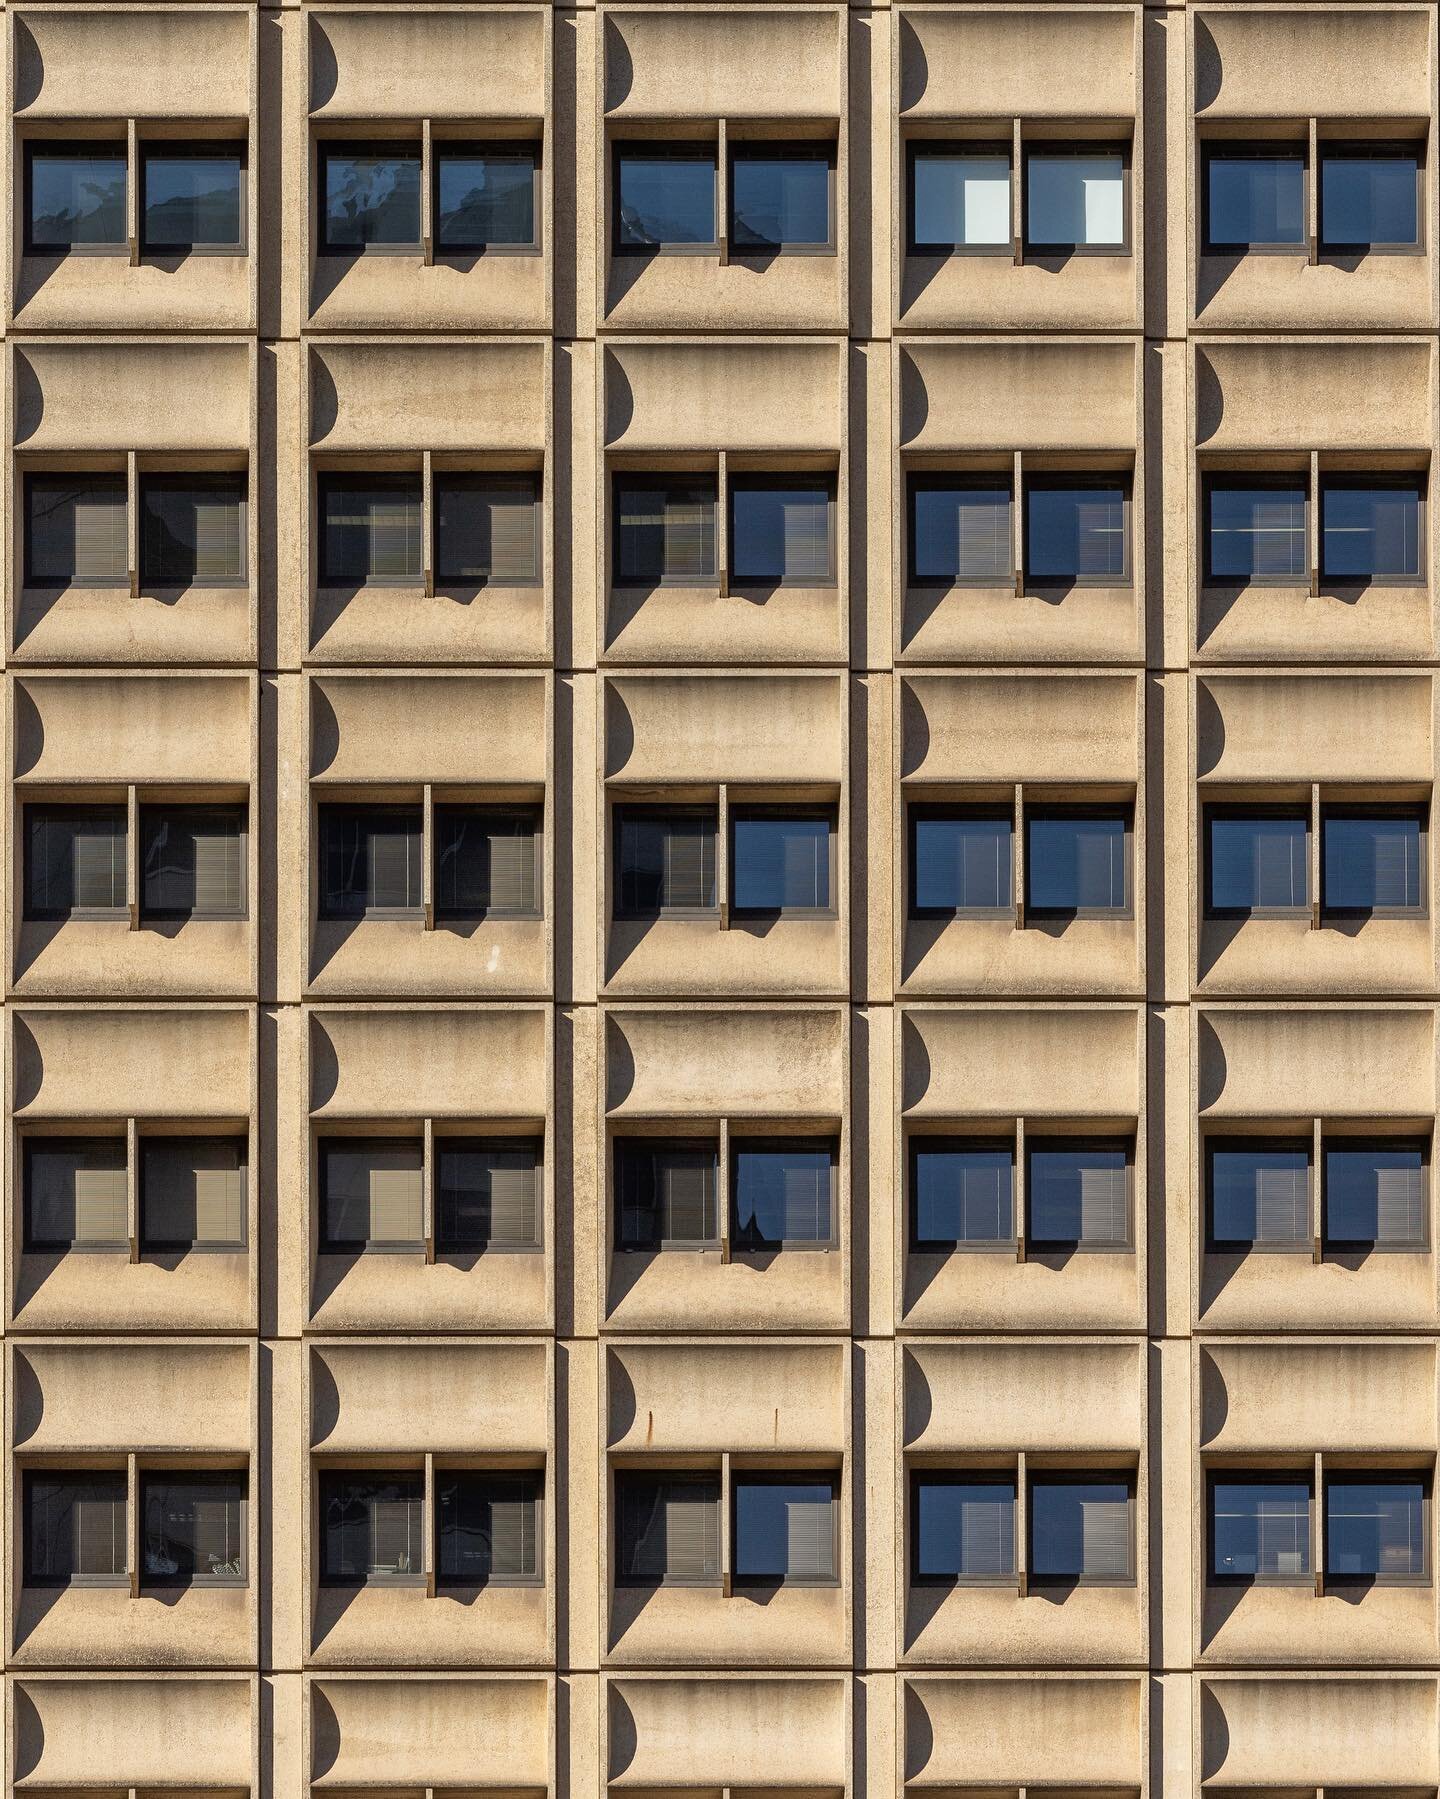 Town Hall House | Ken Woolley - Ancher, Mortlock and Woolley | Sydney, AU